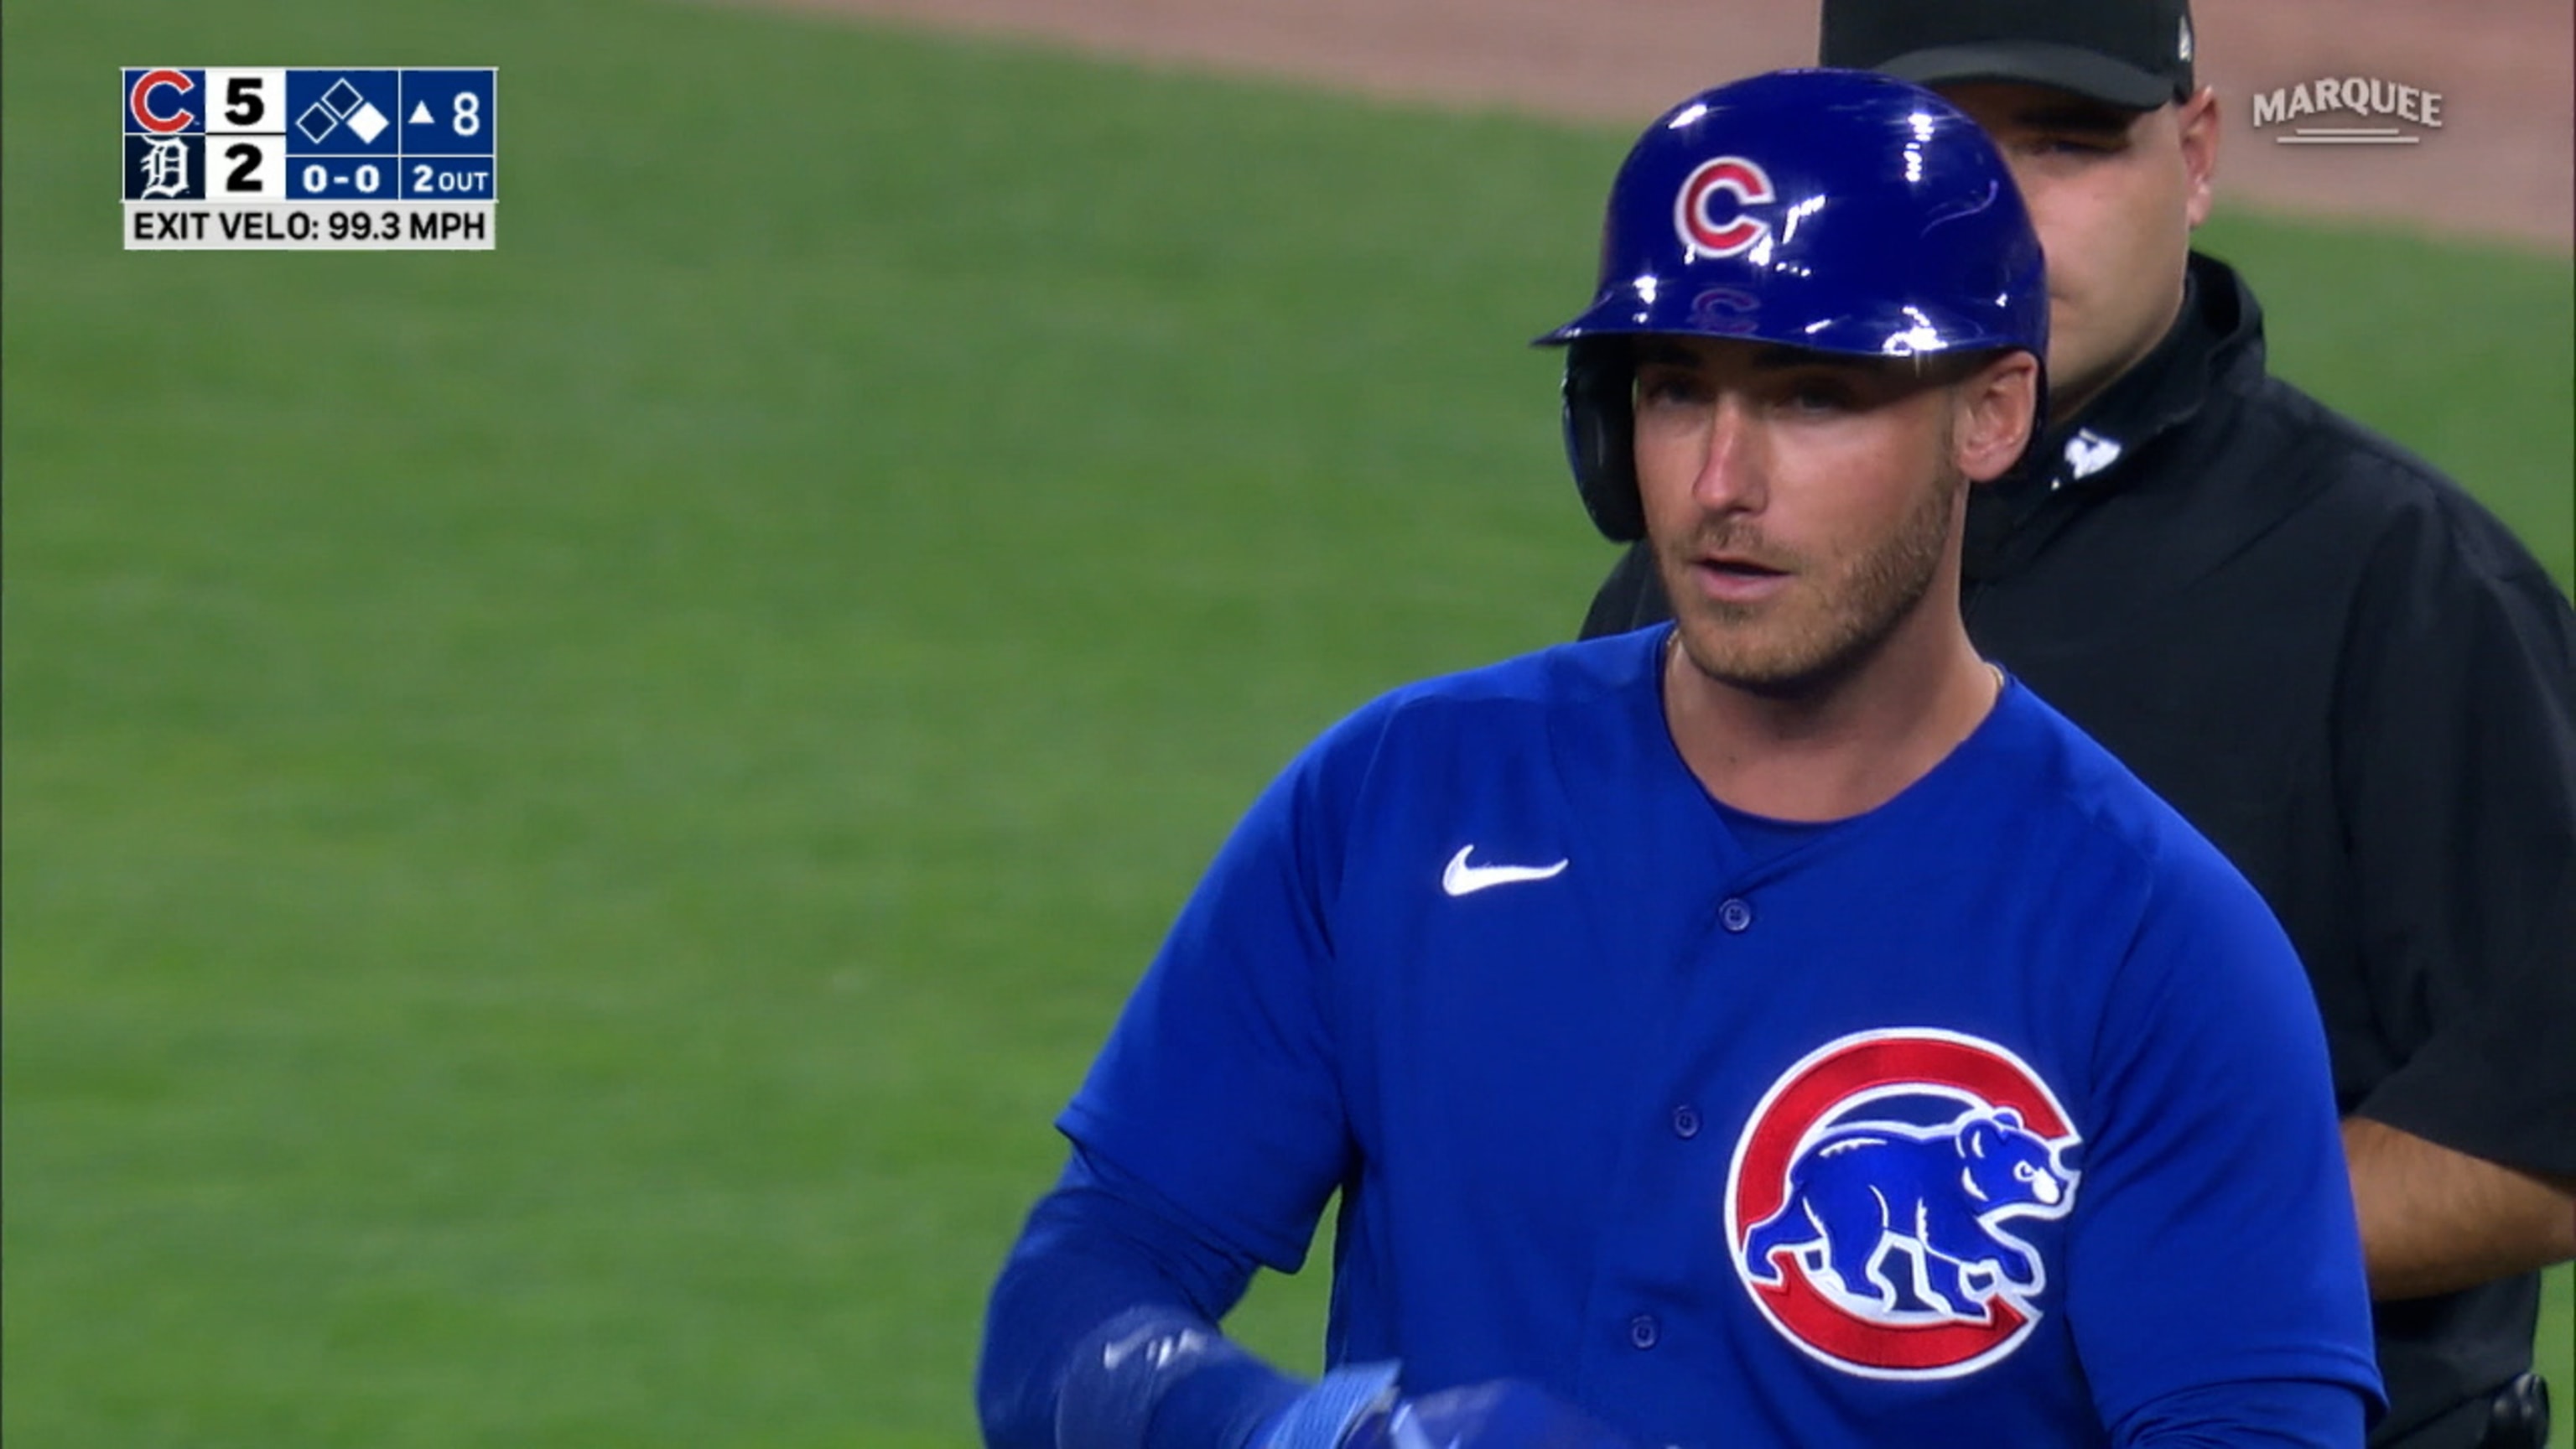 CHGO Cubs Podcast: Cody Bellinger homers, Dansby Swanson stays hot, but Cubs  fall 7-6 to Reds - CHGO